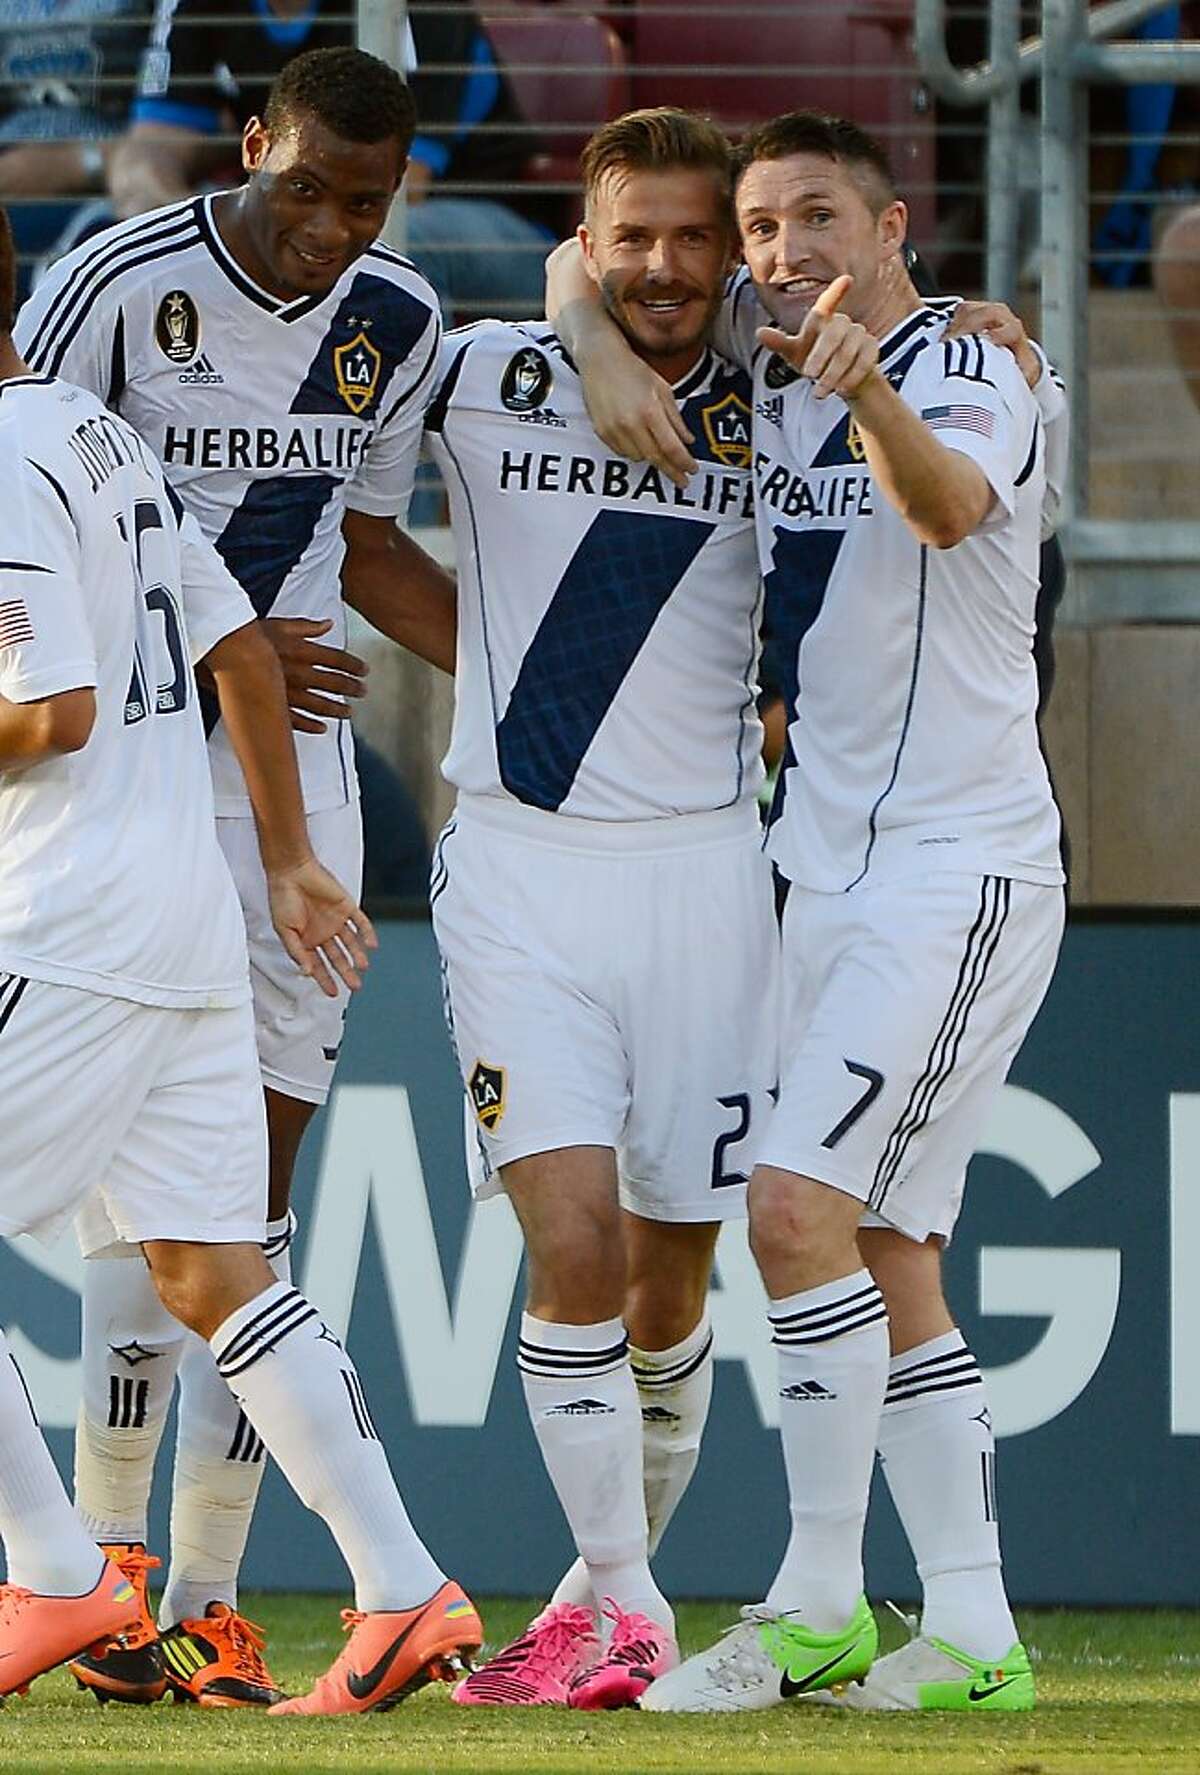 PALO ALTO, CA - JUNE 30: David Junior Lopes #3, David Beckham #23 and Robbie Keane #7 of the Los Angeles Galaxy celebrates after Beckham scored a goal on a free kick in the first half against the San Jose Earthquakes at Stanford Stadium on June 30, 2012 in Palo Alto, California. (Photo by Thearon W. Henderson/Getty Images)